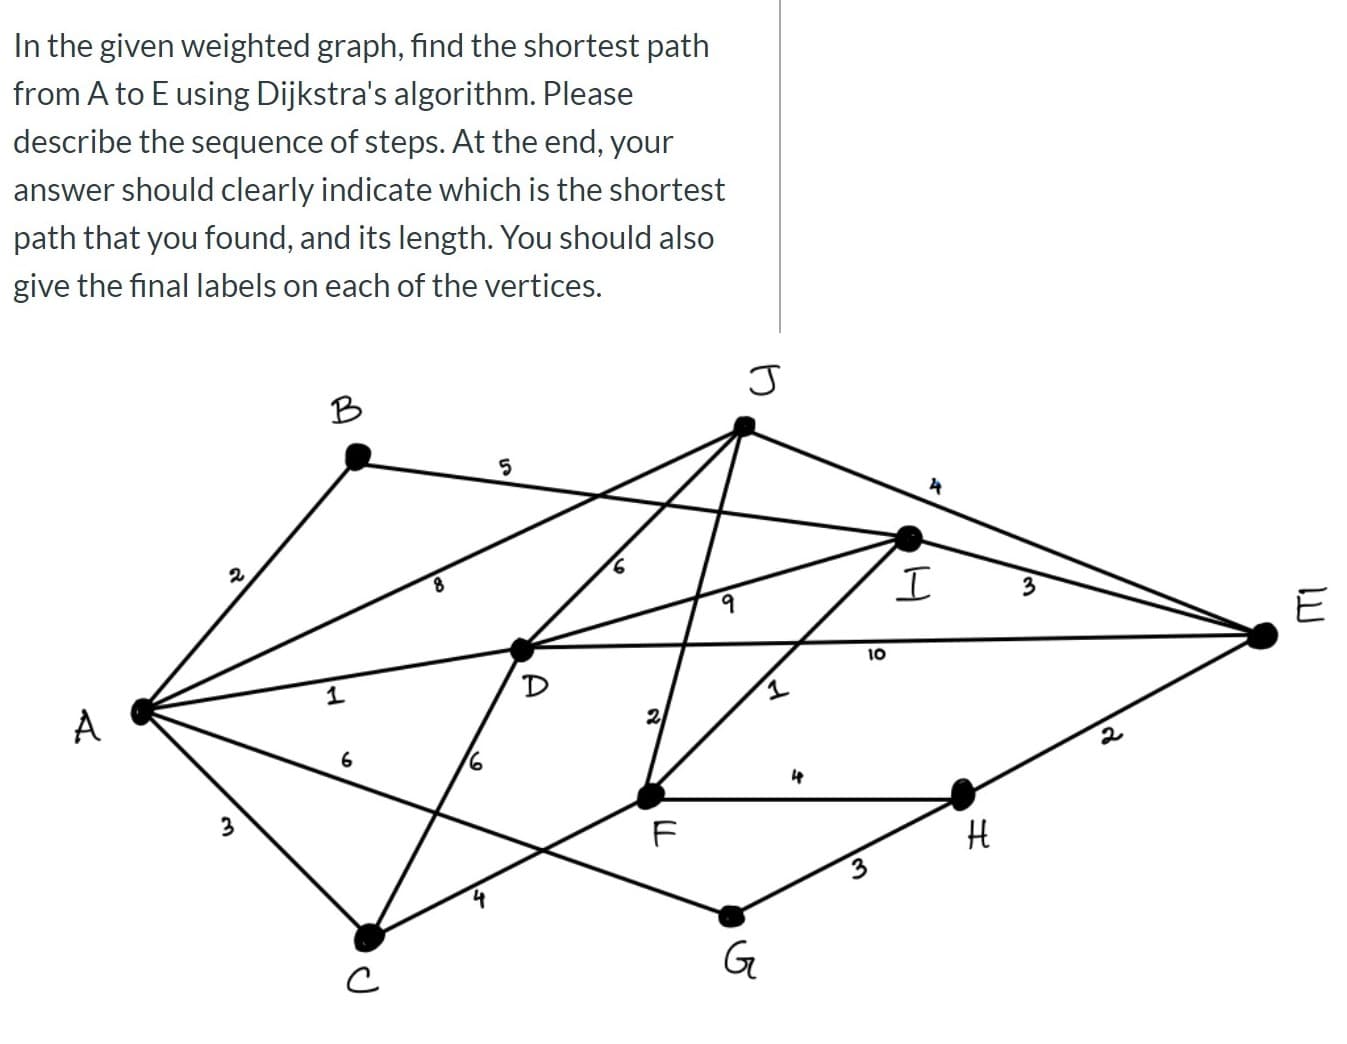 In the given weighted graph, find the shortest path
from A to E using Dijkstra's algorithm. Please
describe the sequence of steps. At the end, your
answer should clearly indicate which is the shortest
path that you found, and its length. You should also
give the final labels on each of the vertices.
B
9.
E
10
D
A
2
3
F
3
G
